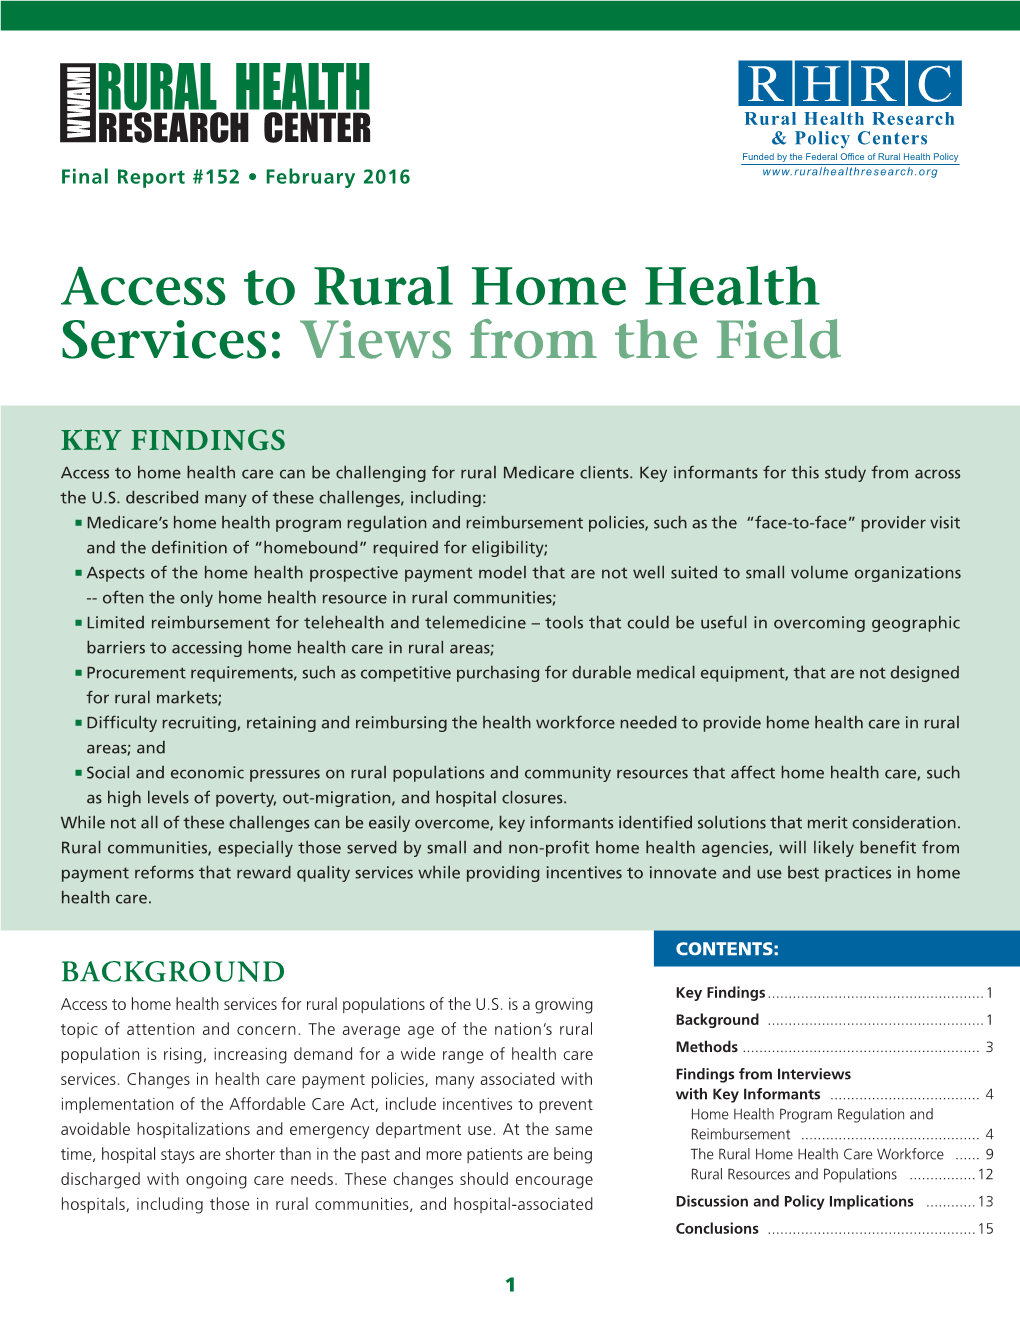 Access to Rural Home Health Services: Views from the Field